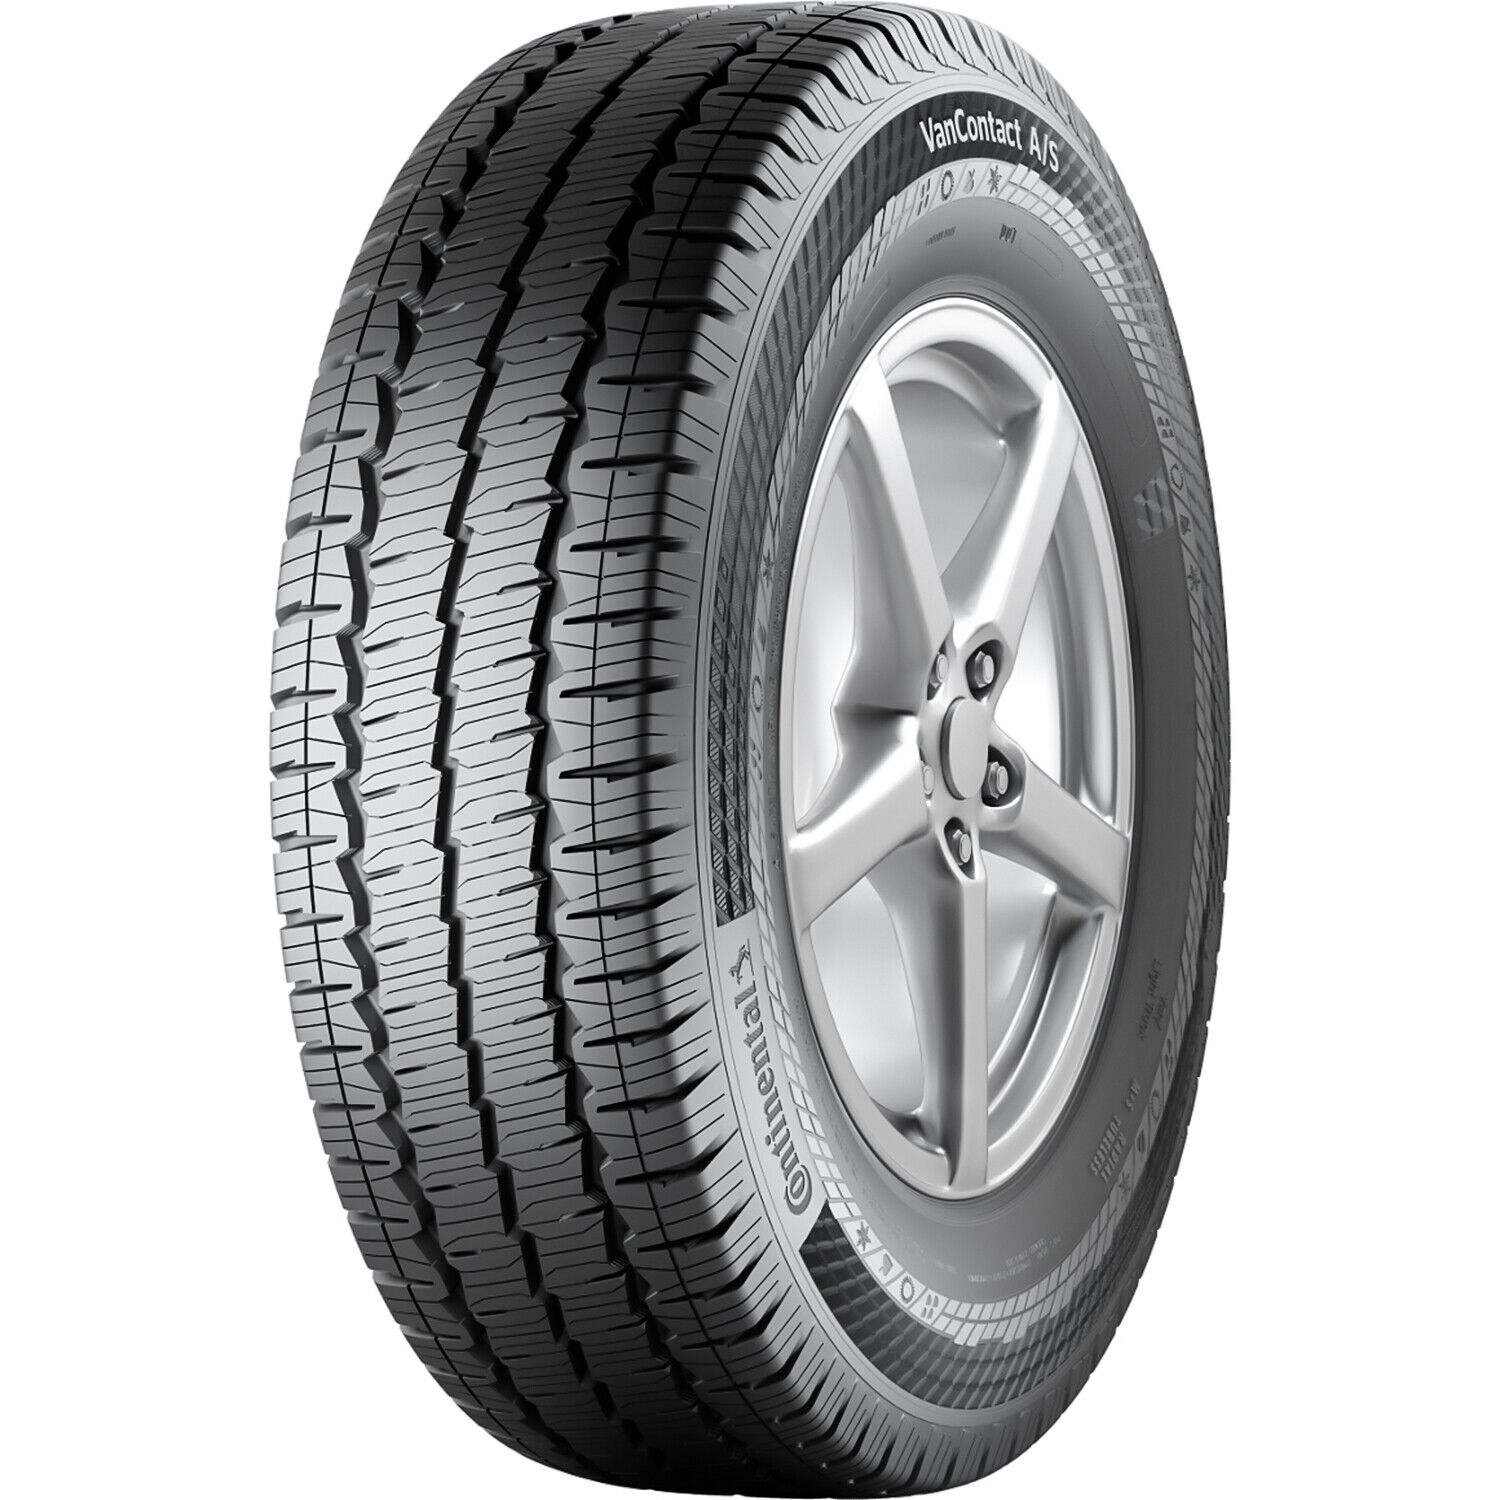 4 Tires Continental VanContact A/S (MO) 285/65R16C Load E 10 Ply Commercial